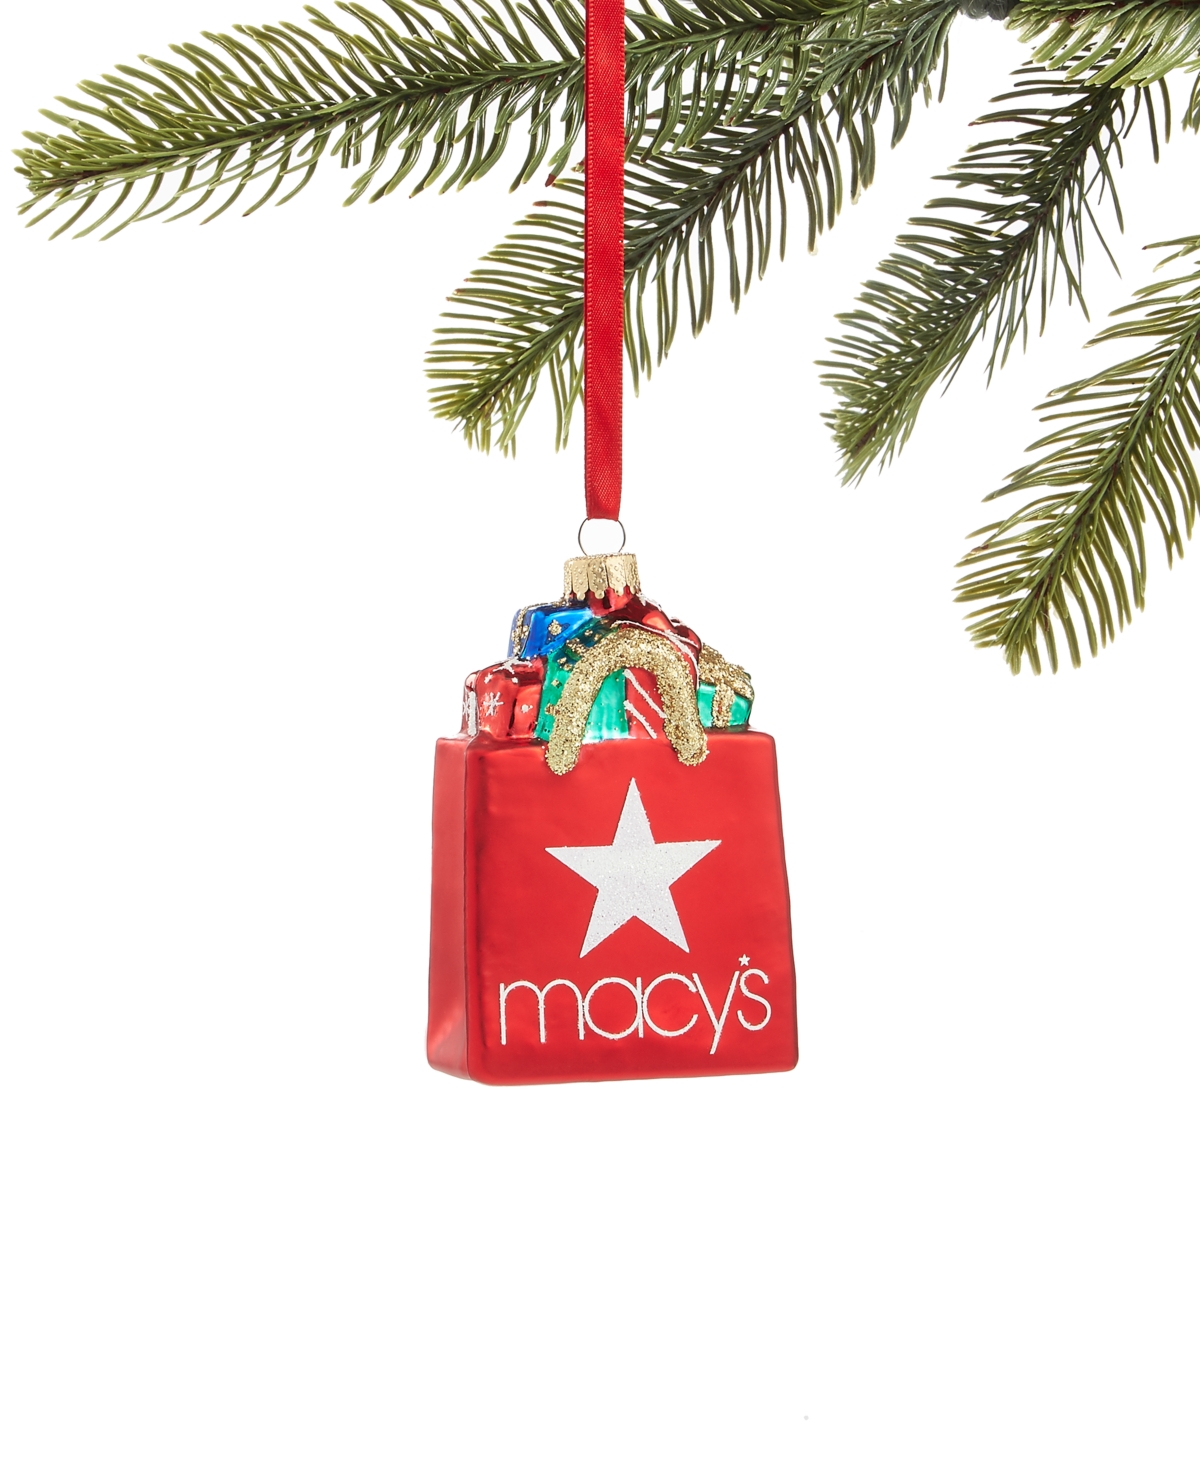 Holiday Lane Macy's Shopping Bag Ornament, Created for Macy's